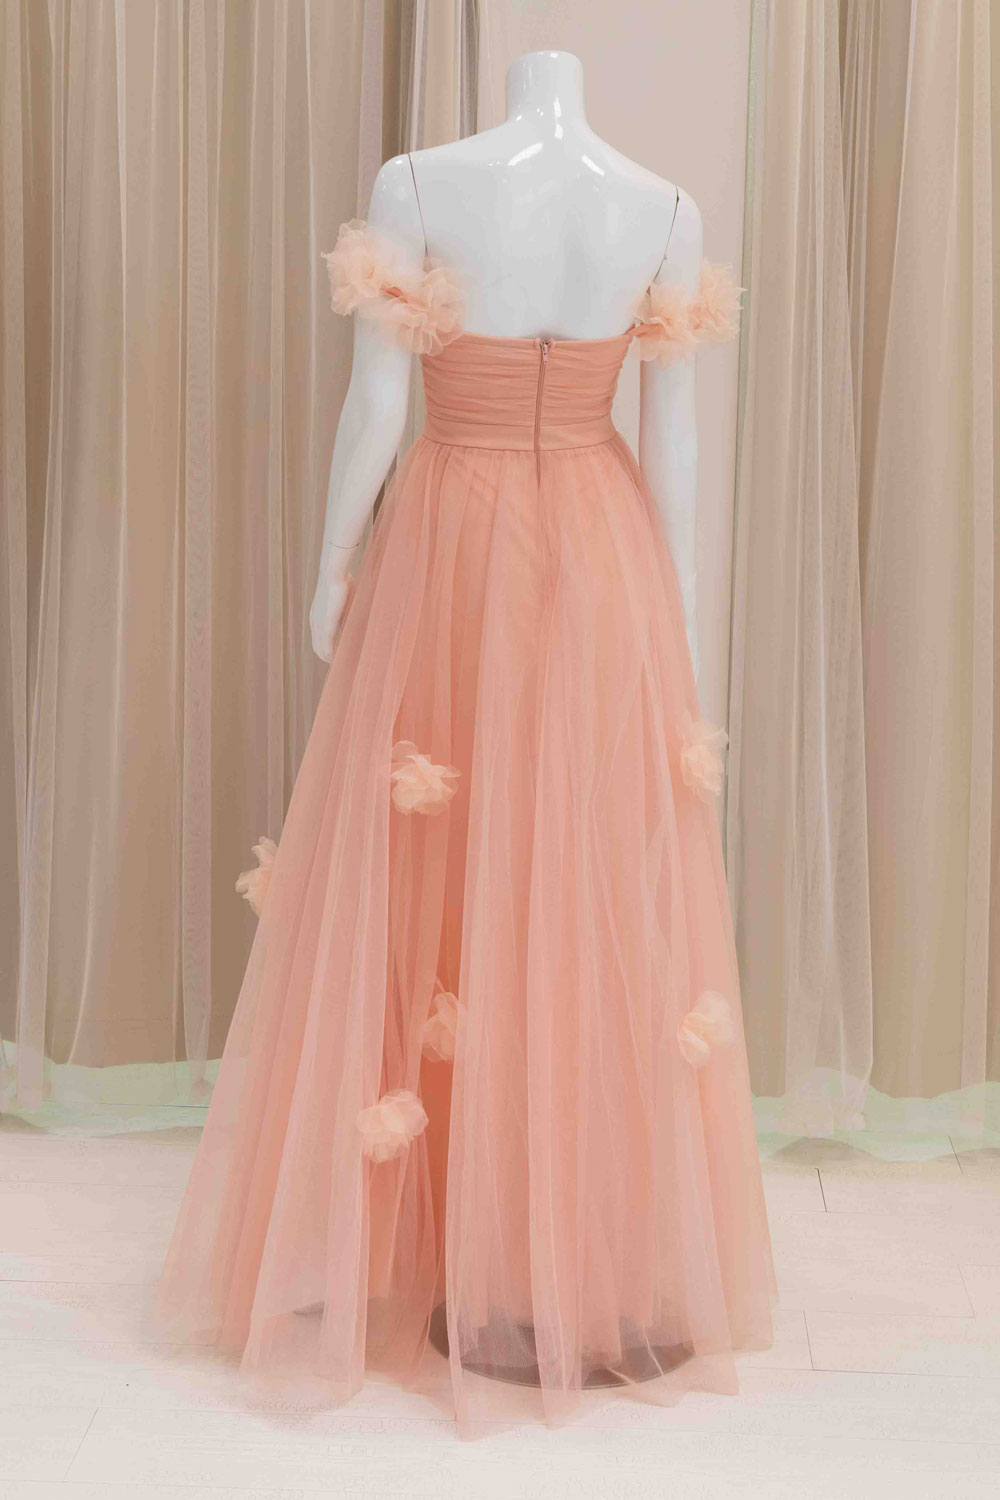 Simple Tulle Prom Dress in Peach